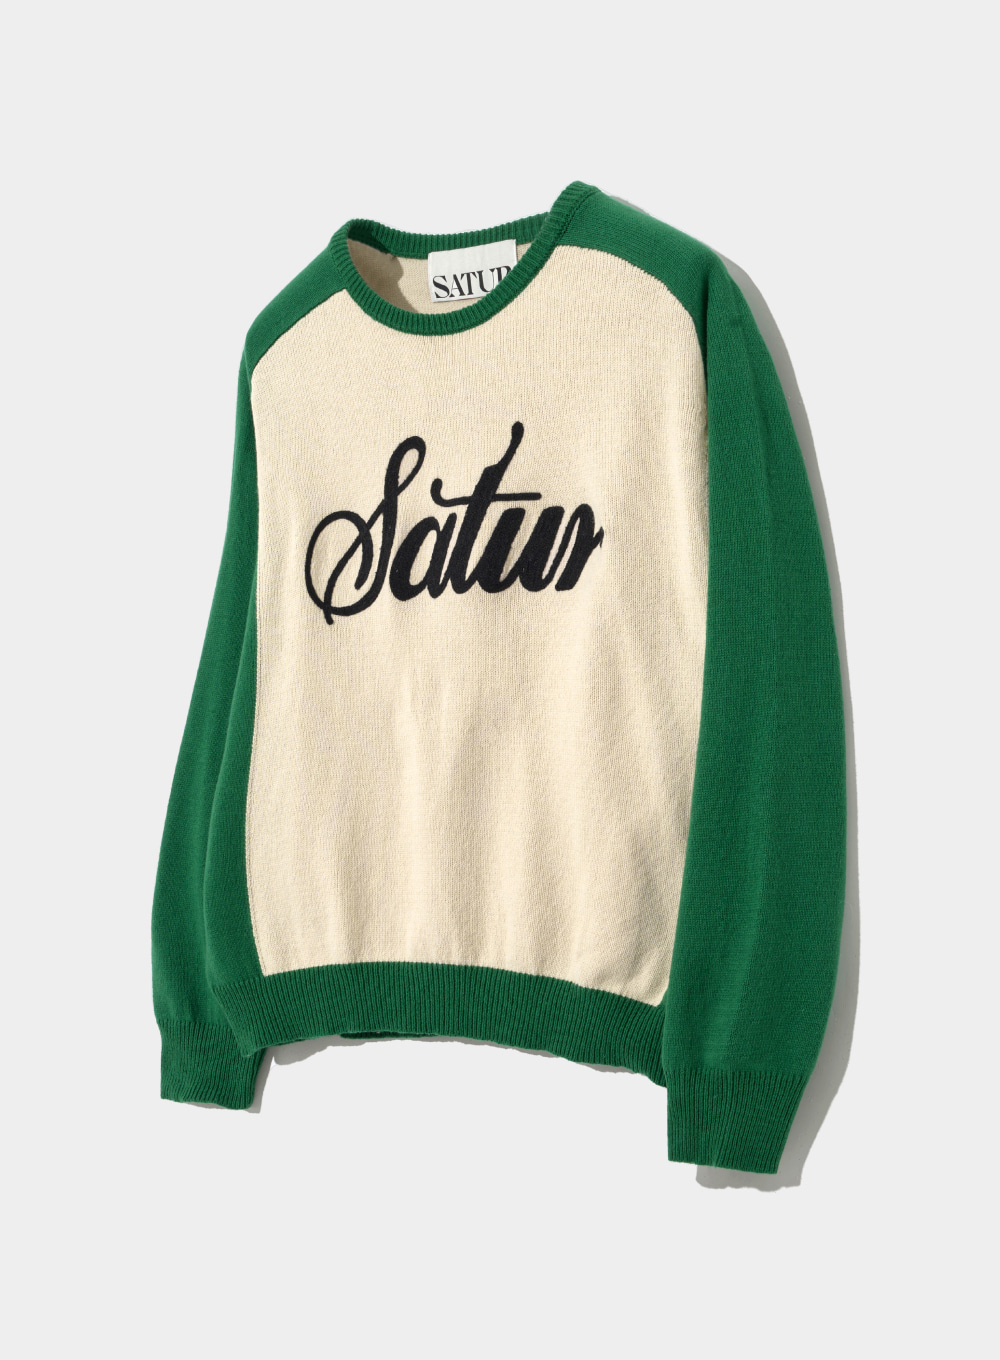 Retro Chain Embroidery Soft Knit - Beige Green